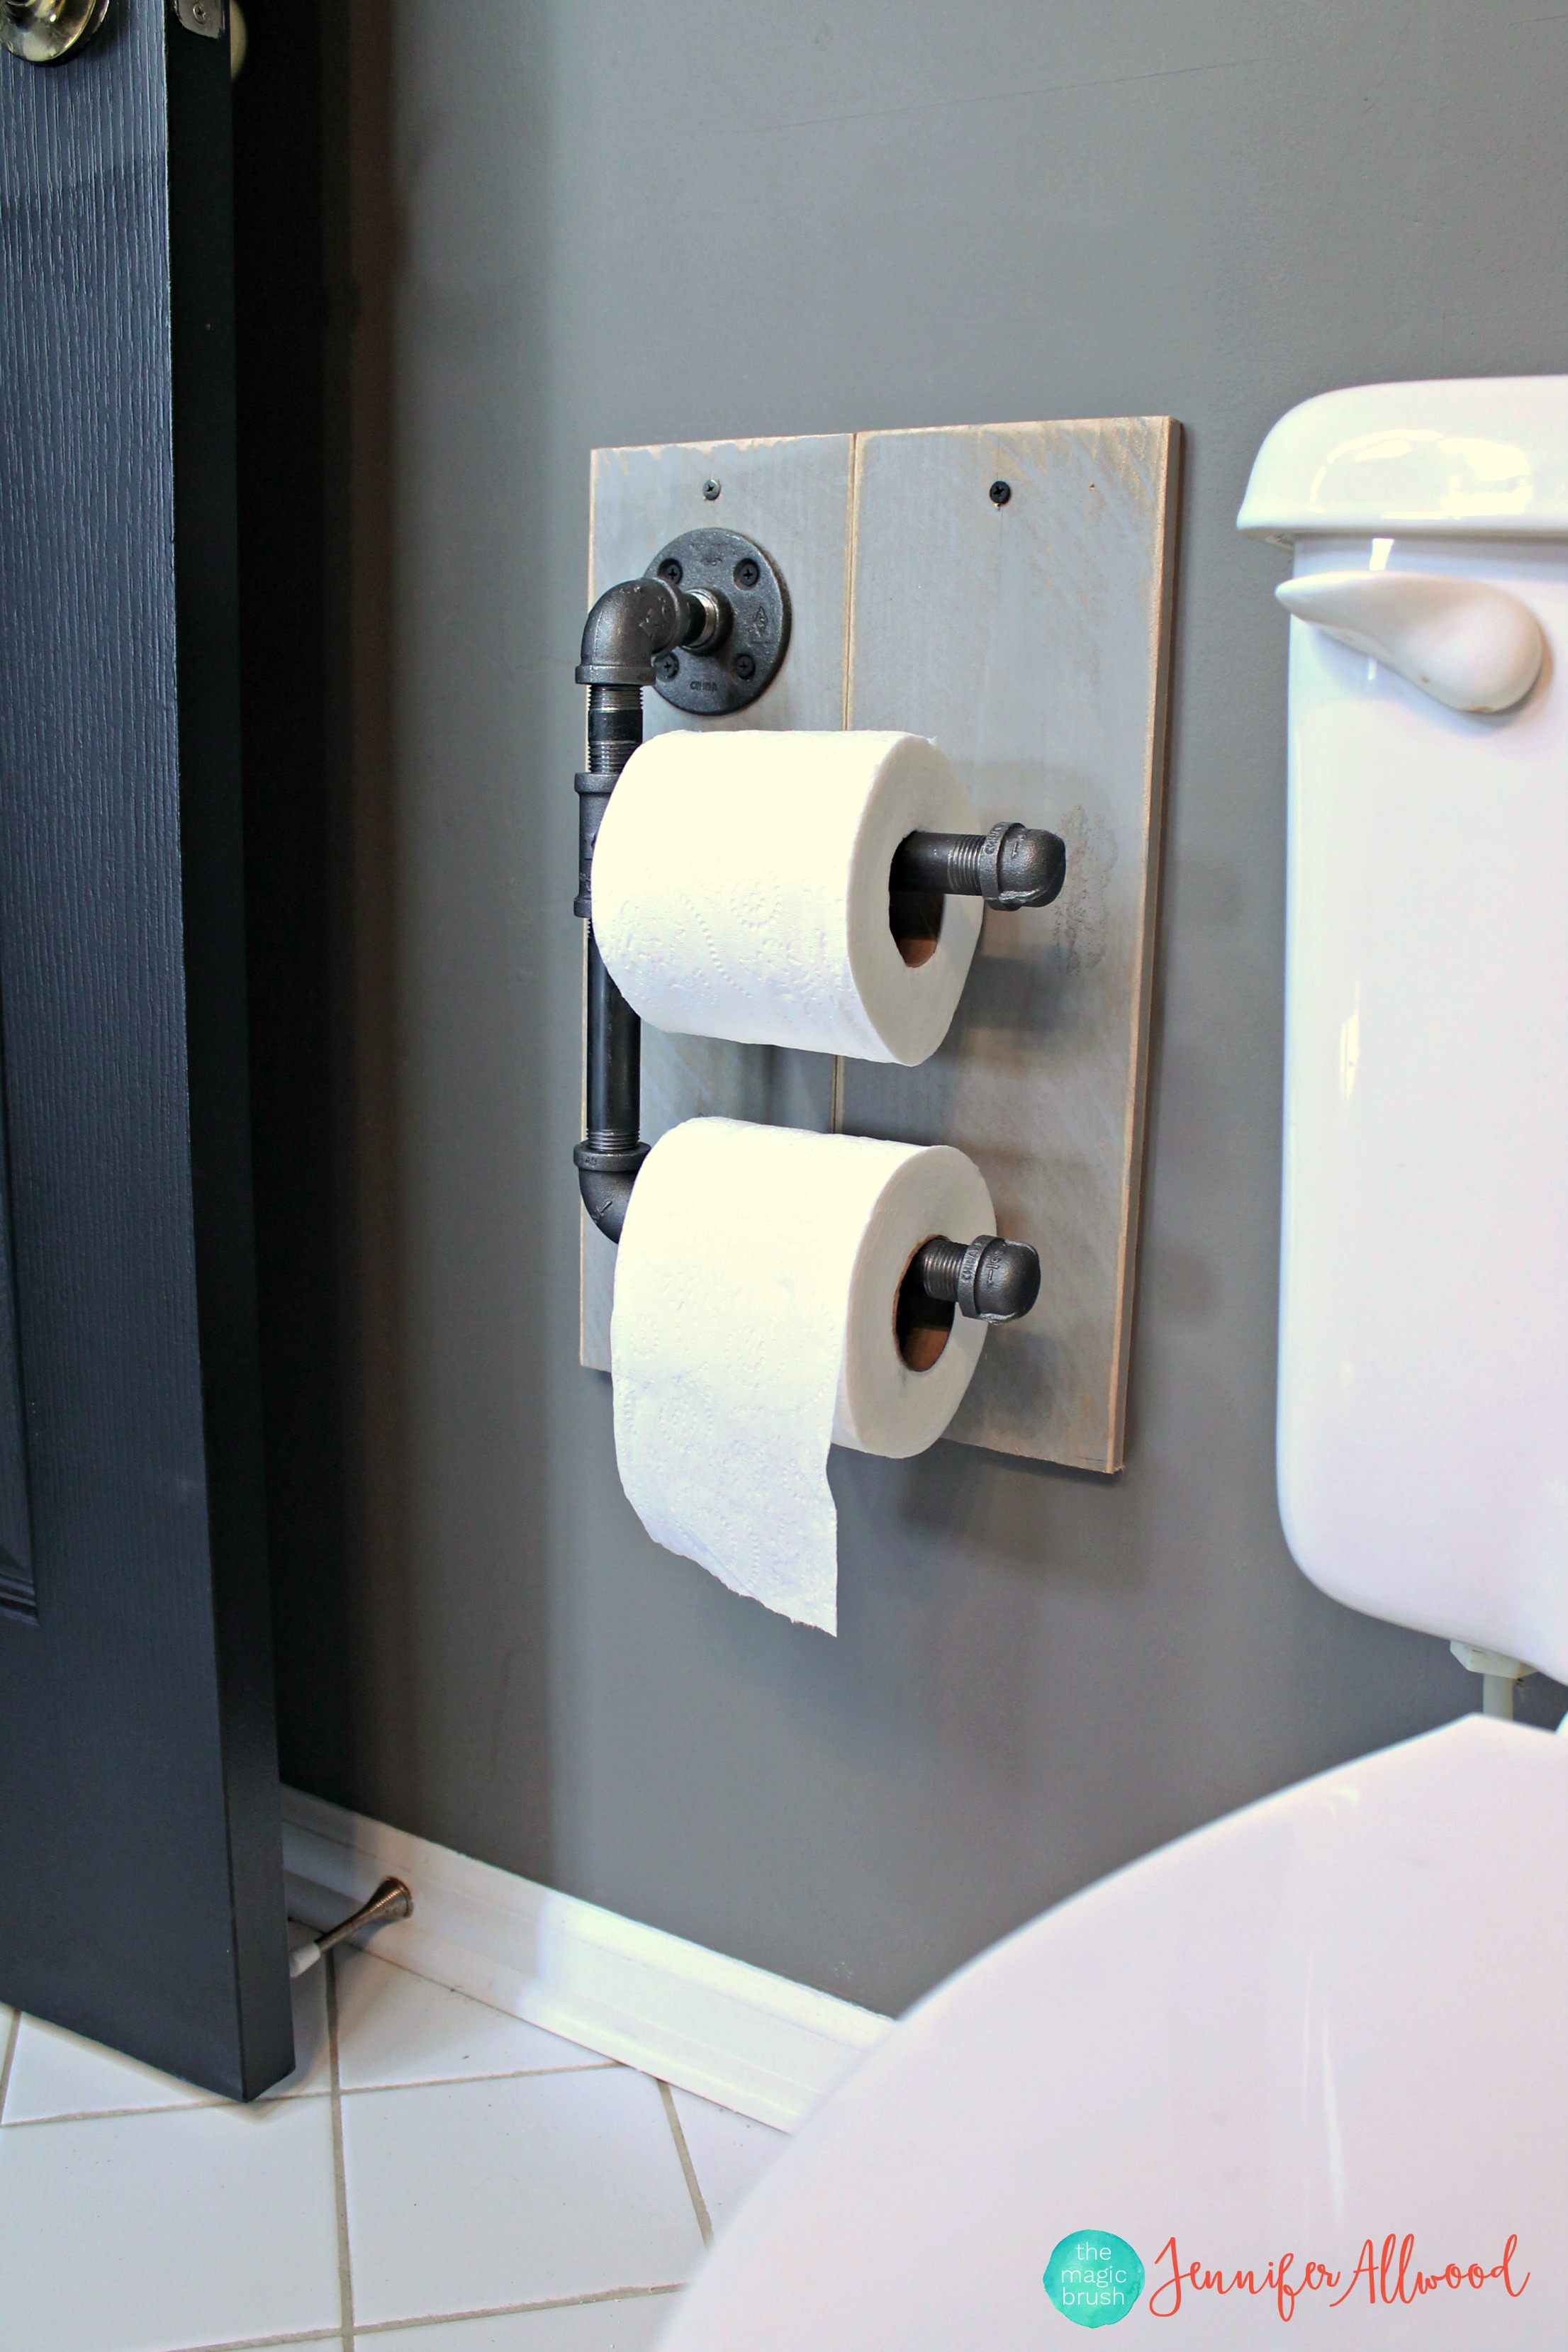 How to make an industrial looking toilet paper holder (for kids who don’t replace the t.p.!)